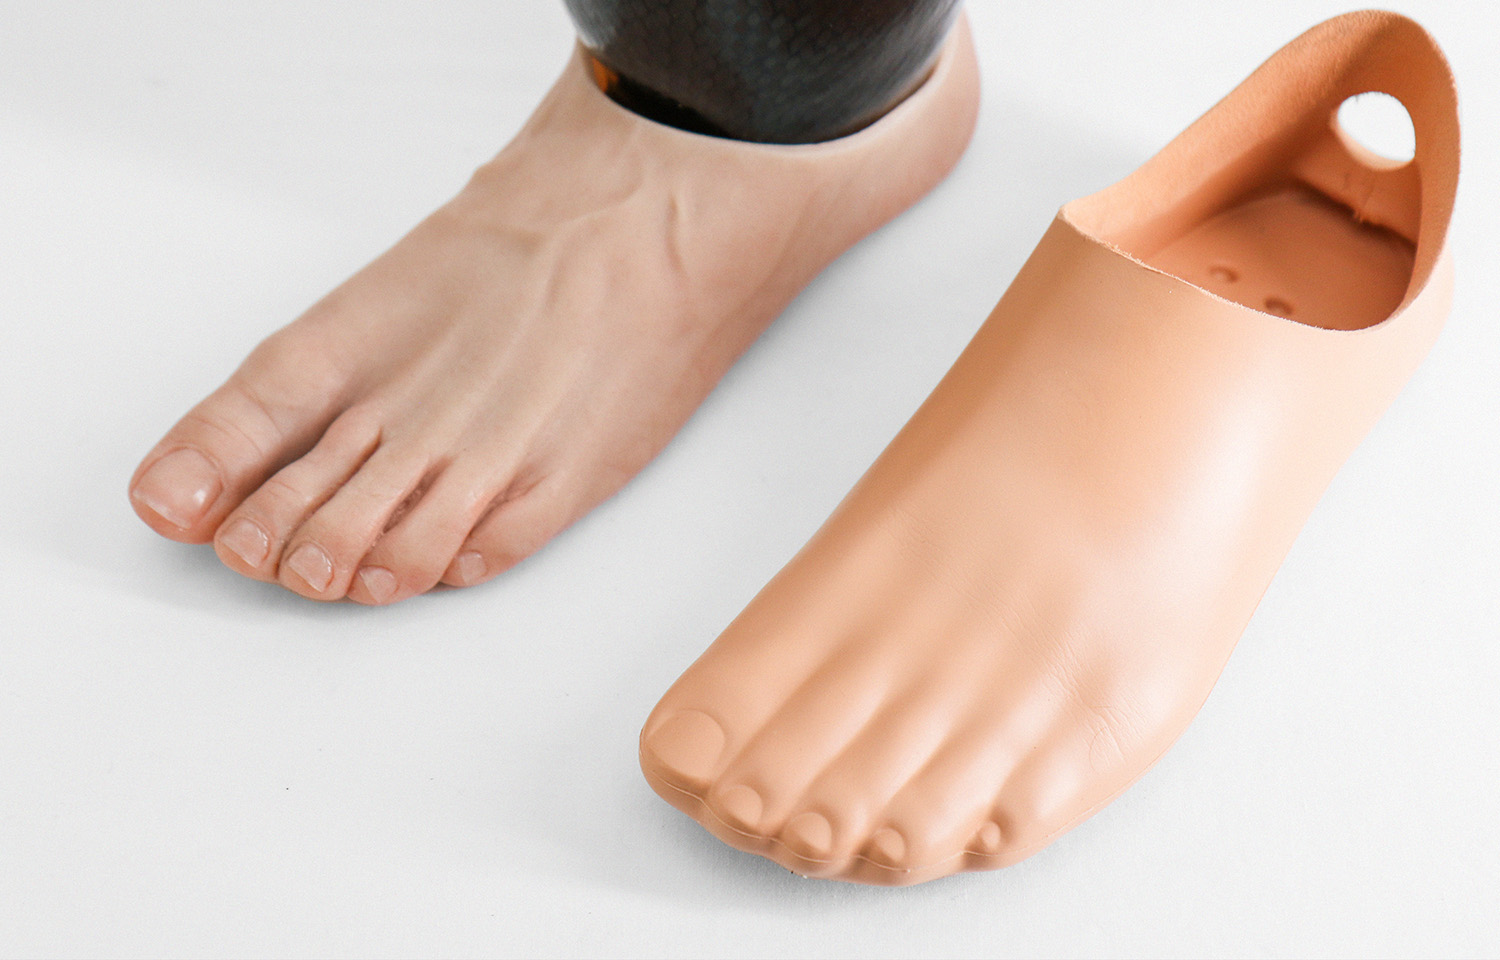 Premium Ready-to-Wear Prosthetic Foot Shell – Get Skintones